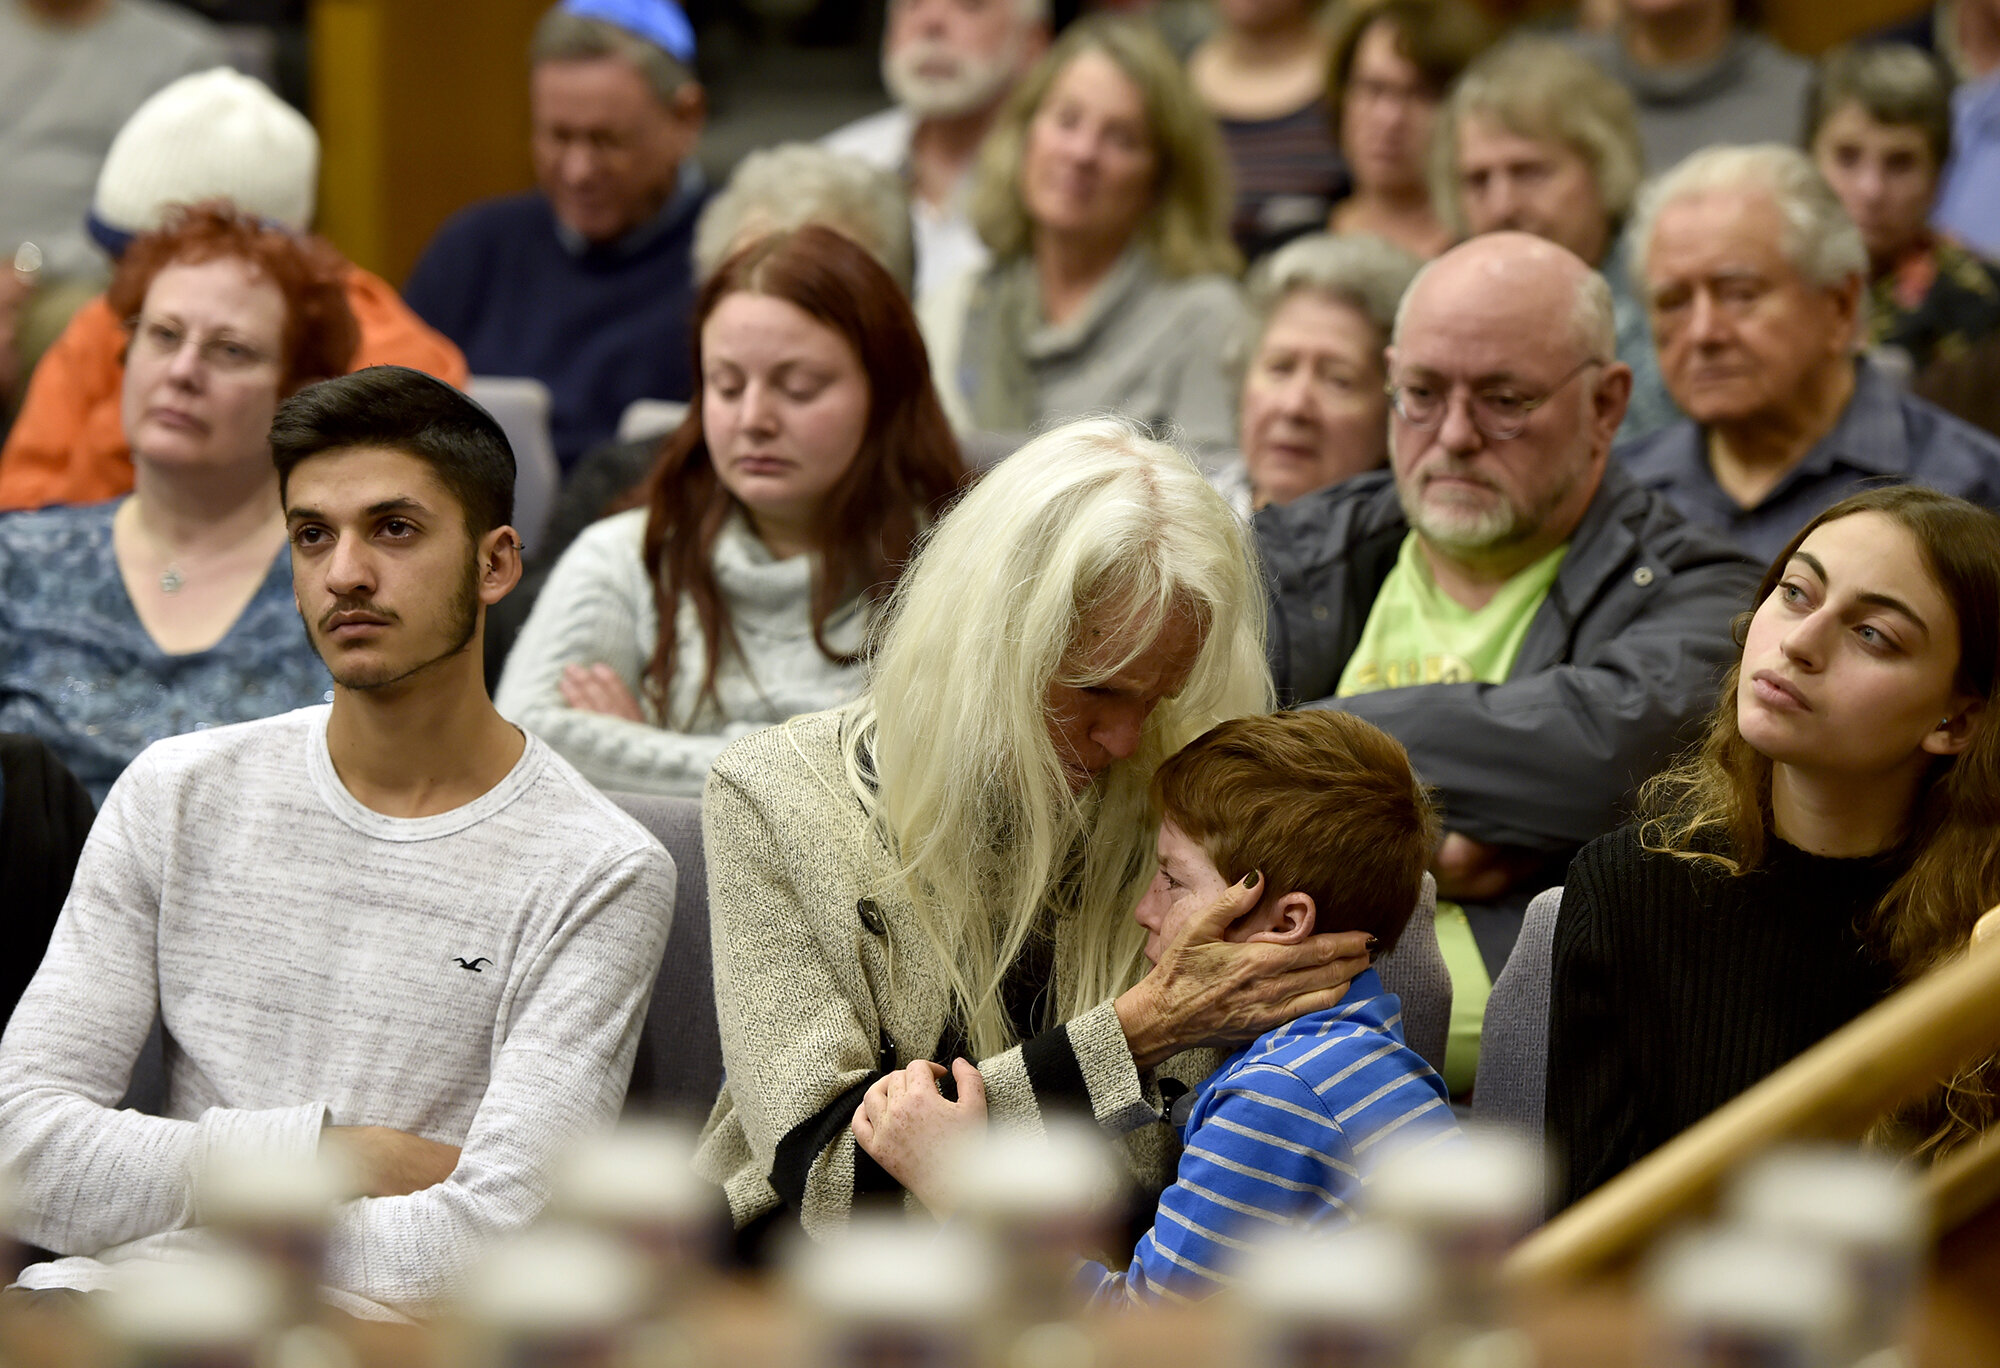  Liz Bochain holds her son Jacob Feinsteil, 9, as they react to a speaker during a “Prayers for Pittsburgh” vigil at Temple Emanu-El on Monday, October 29, 2018 in Waterford. (The Day)  